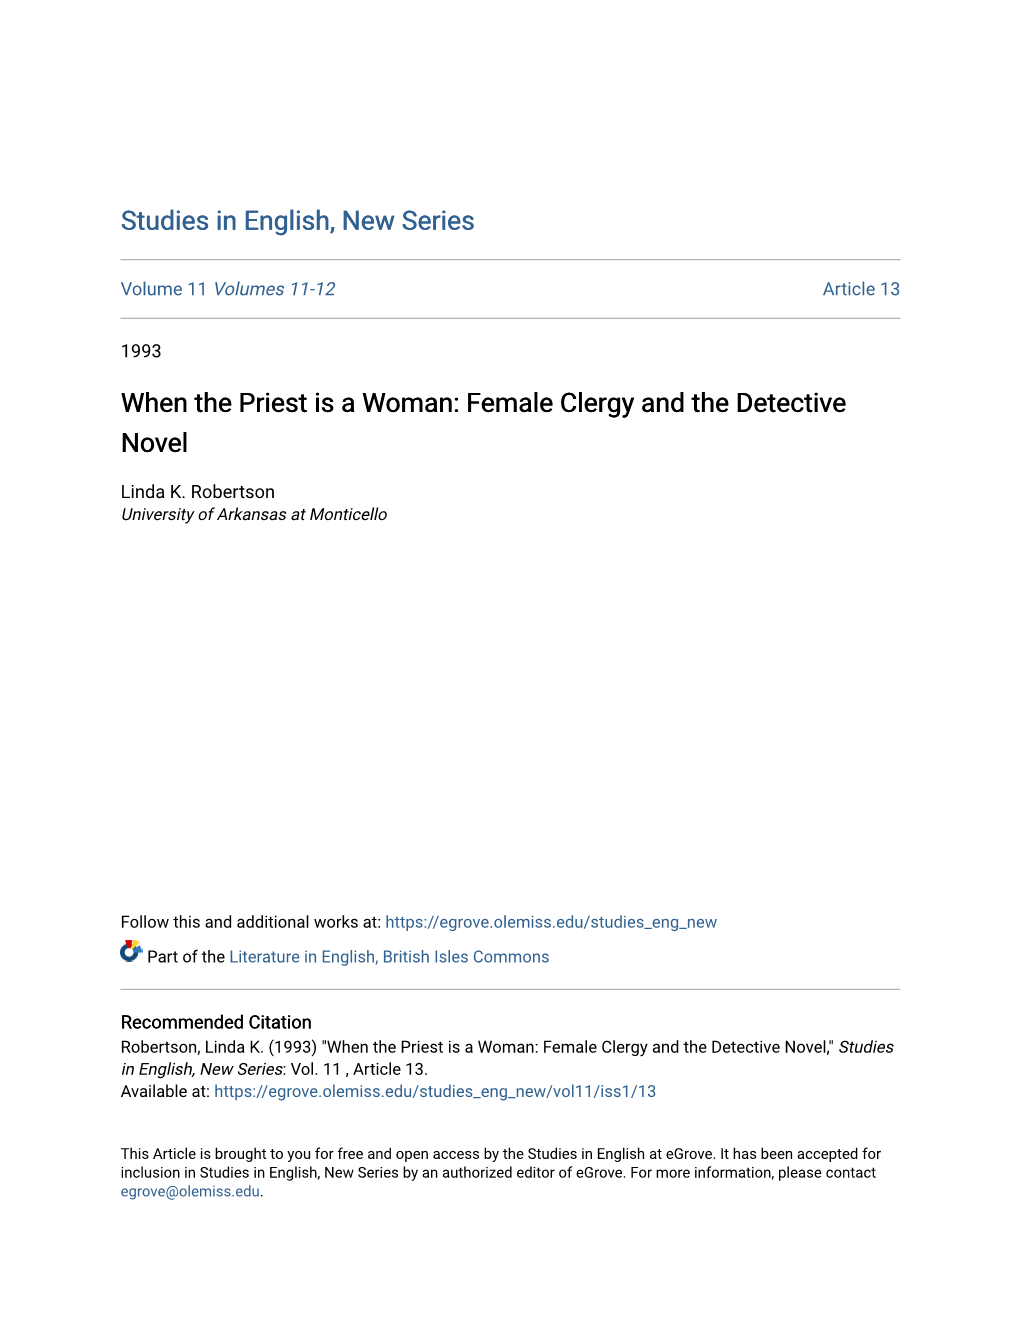 Female Clergy and the Detective Novel